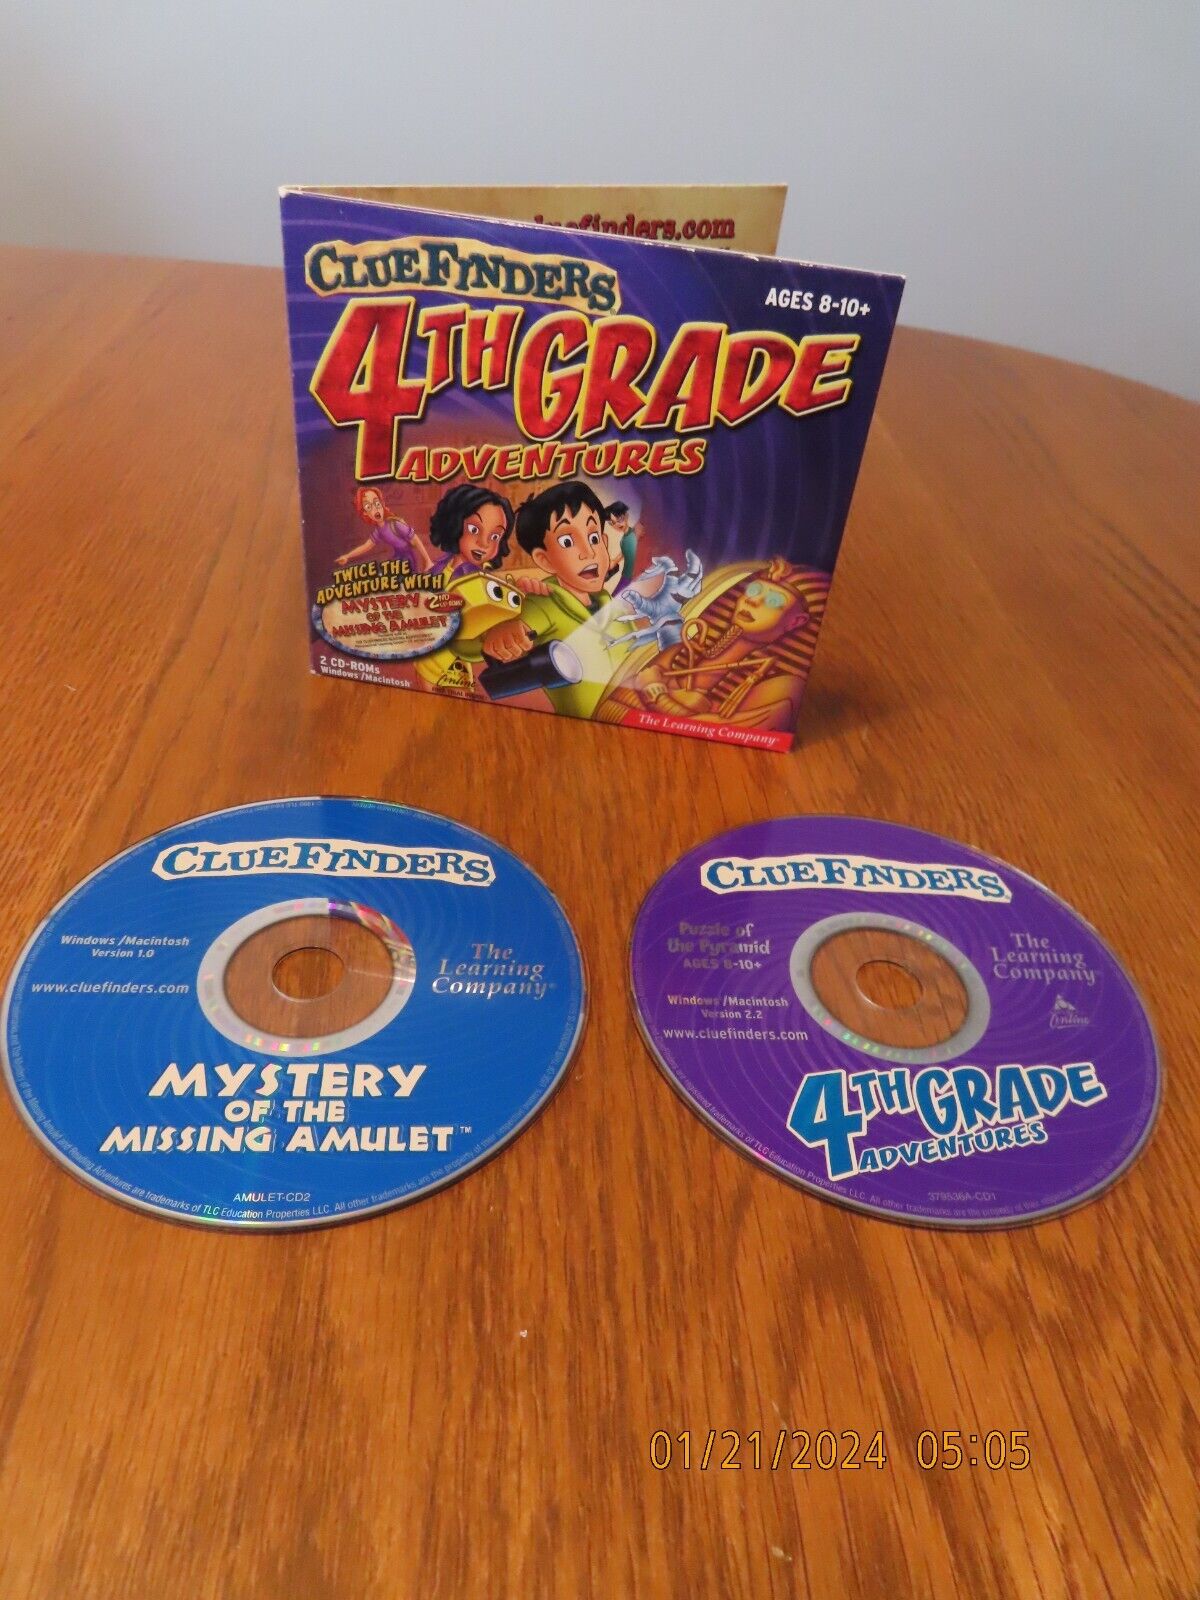 Clue Finders 4th Grade Adventures PC MAC CD learn Math ~Language~Science 2001